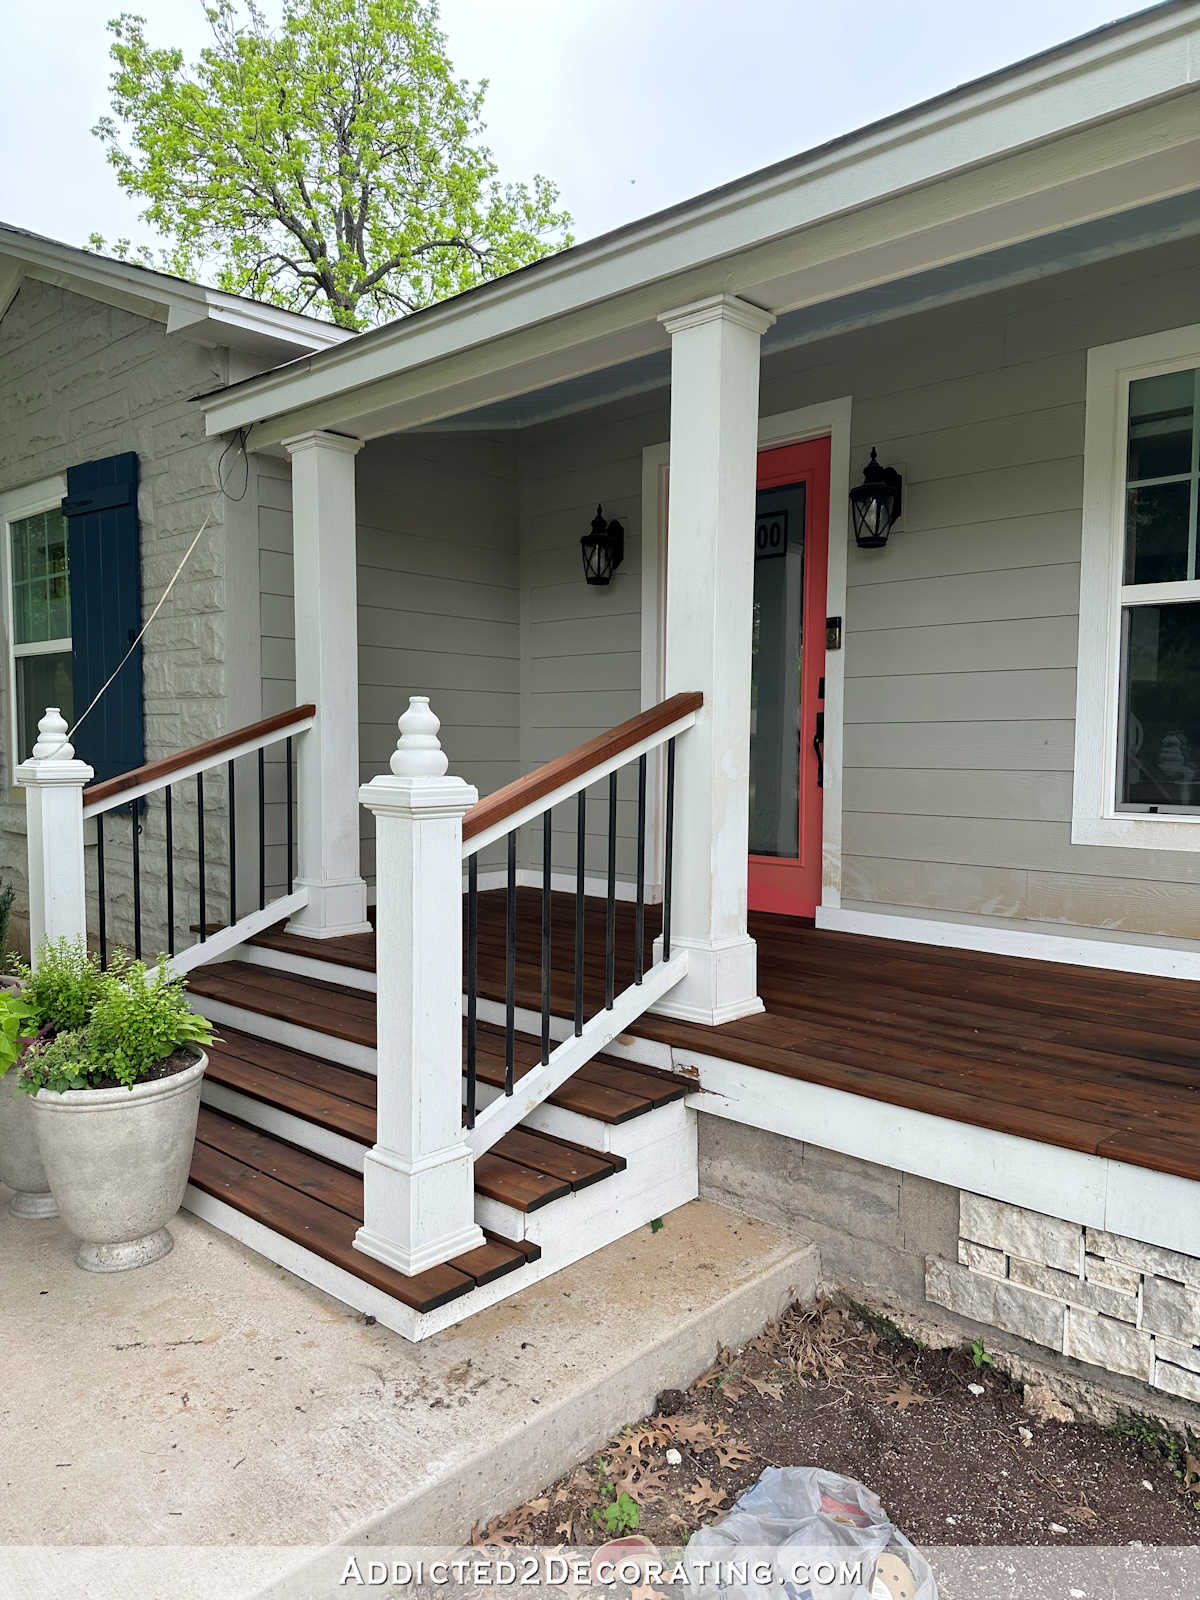 Ready Seal in Dark Walnut was used to stain the cedar front porch and steps, white trim, light gray